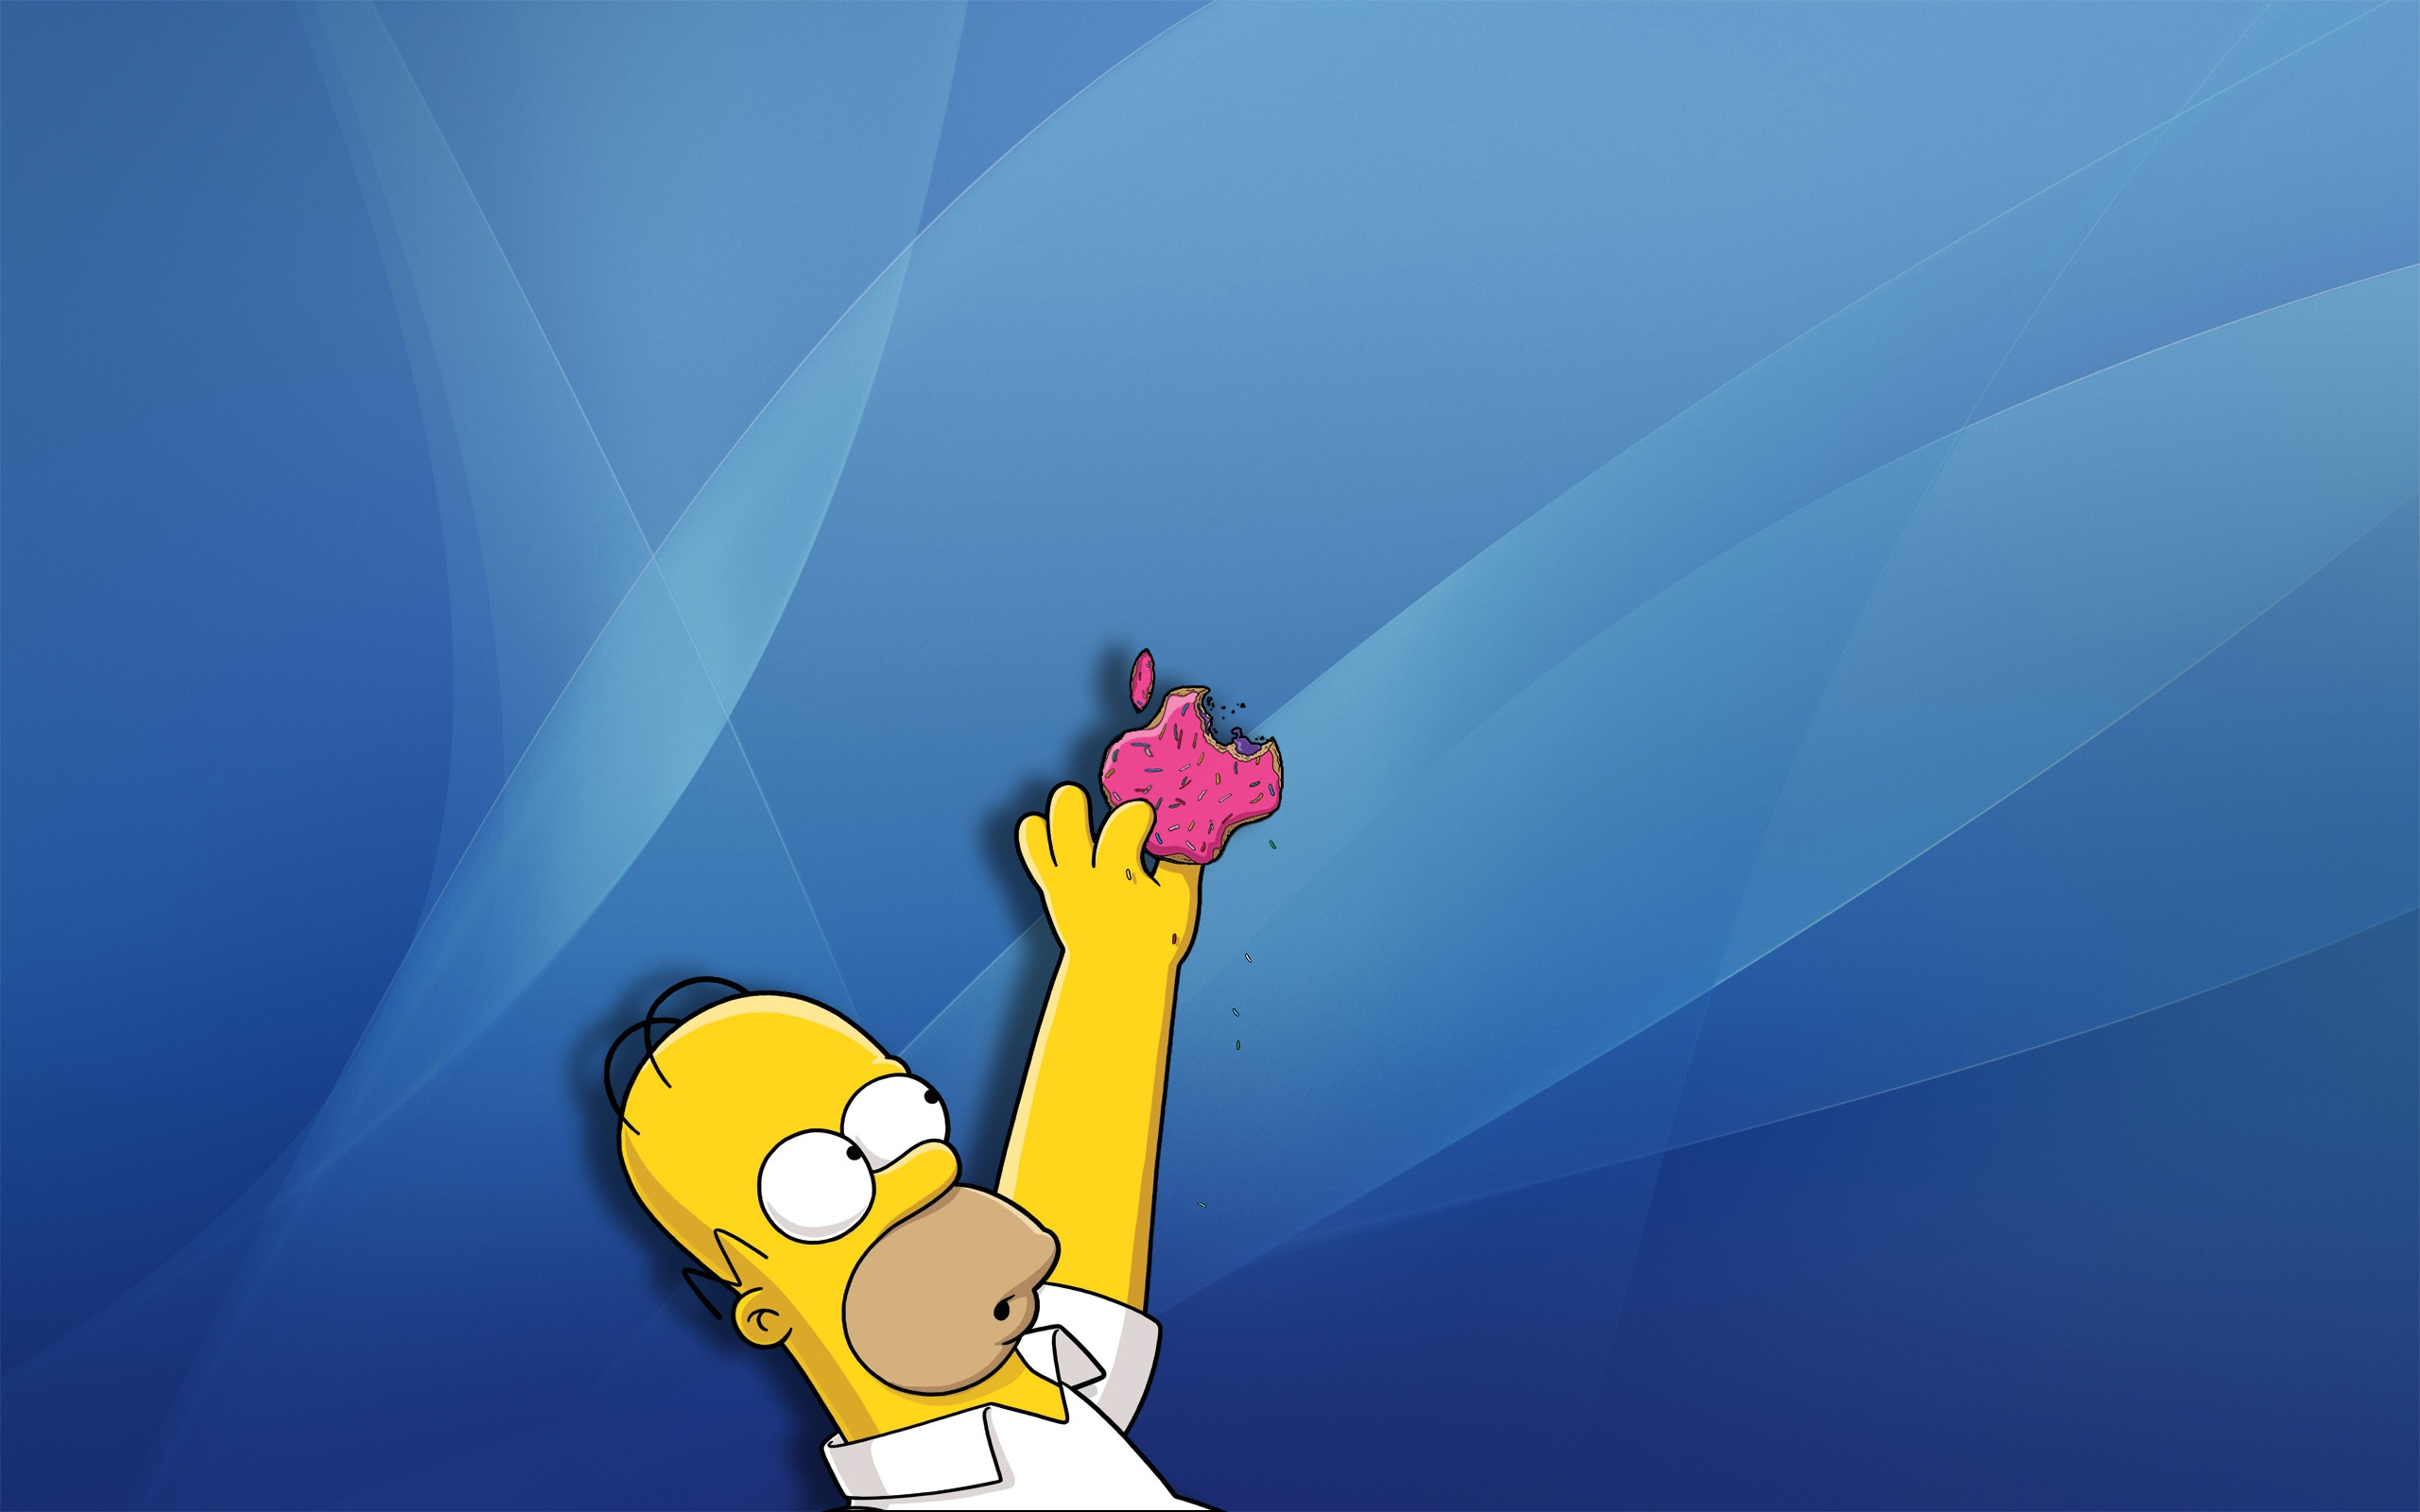 Download "Homer Simpson" wallpapers for